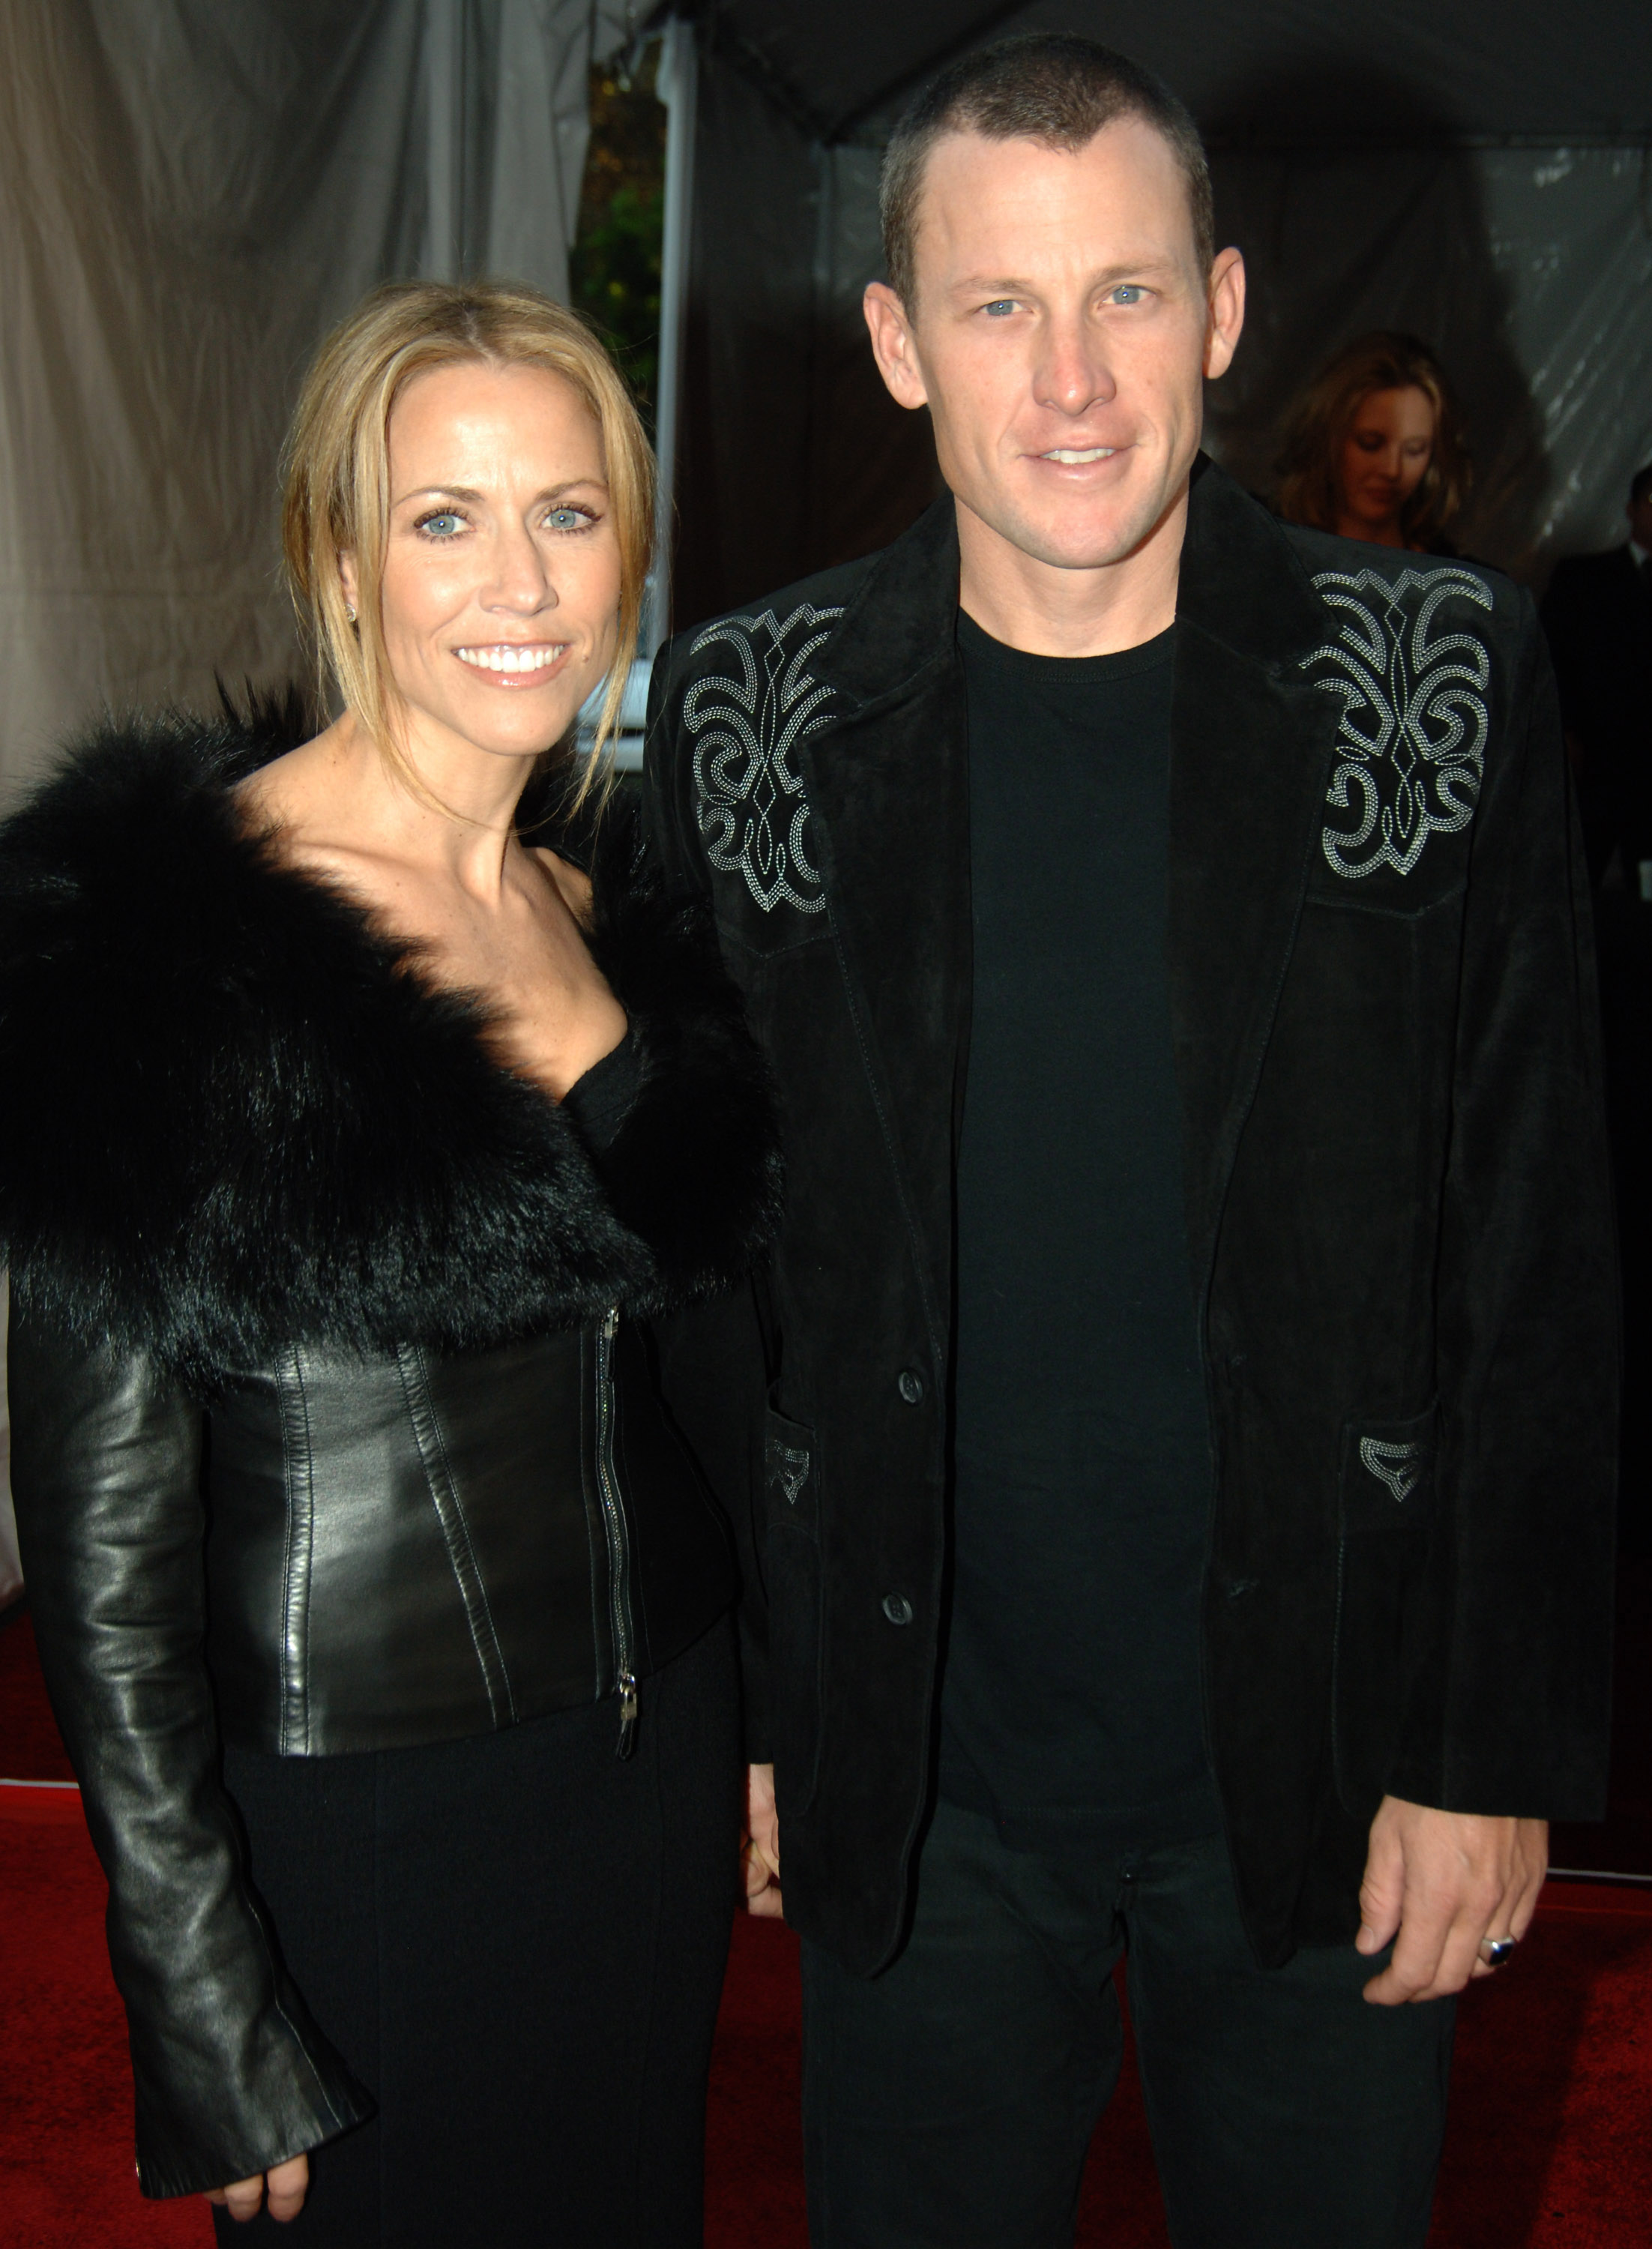 Singer Sheryl Crow and Lance Armstrong at the 33rd Annual American Music Awards on November 22, 2005 in Los Angeles, California. | Source: Getty Images